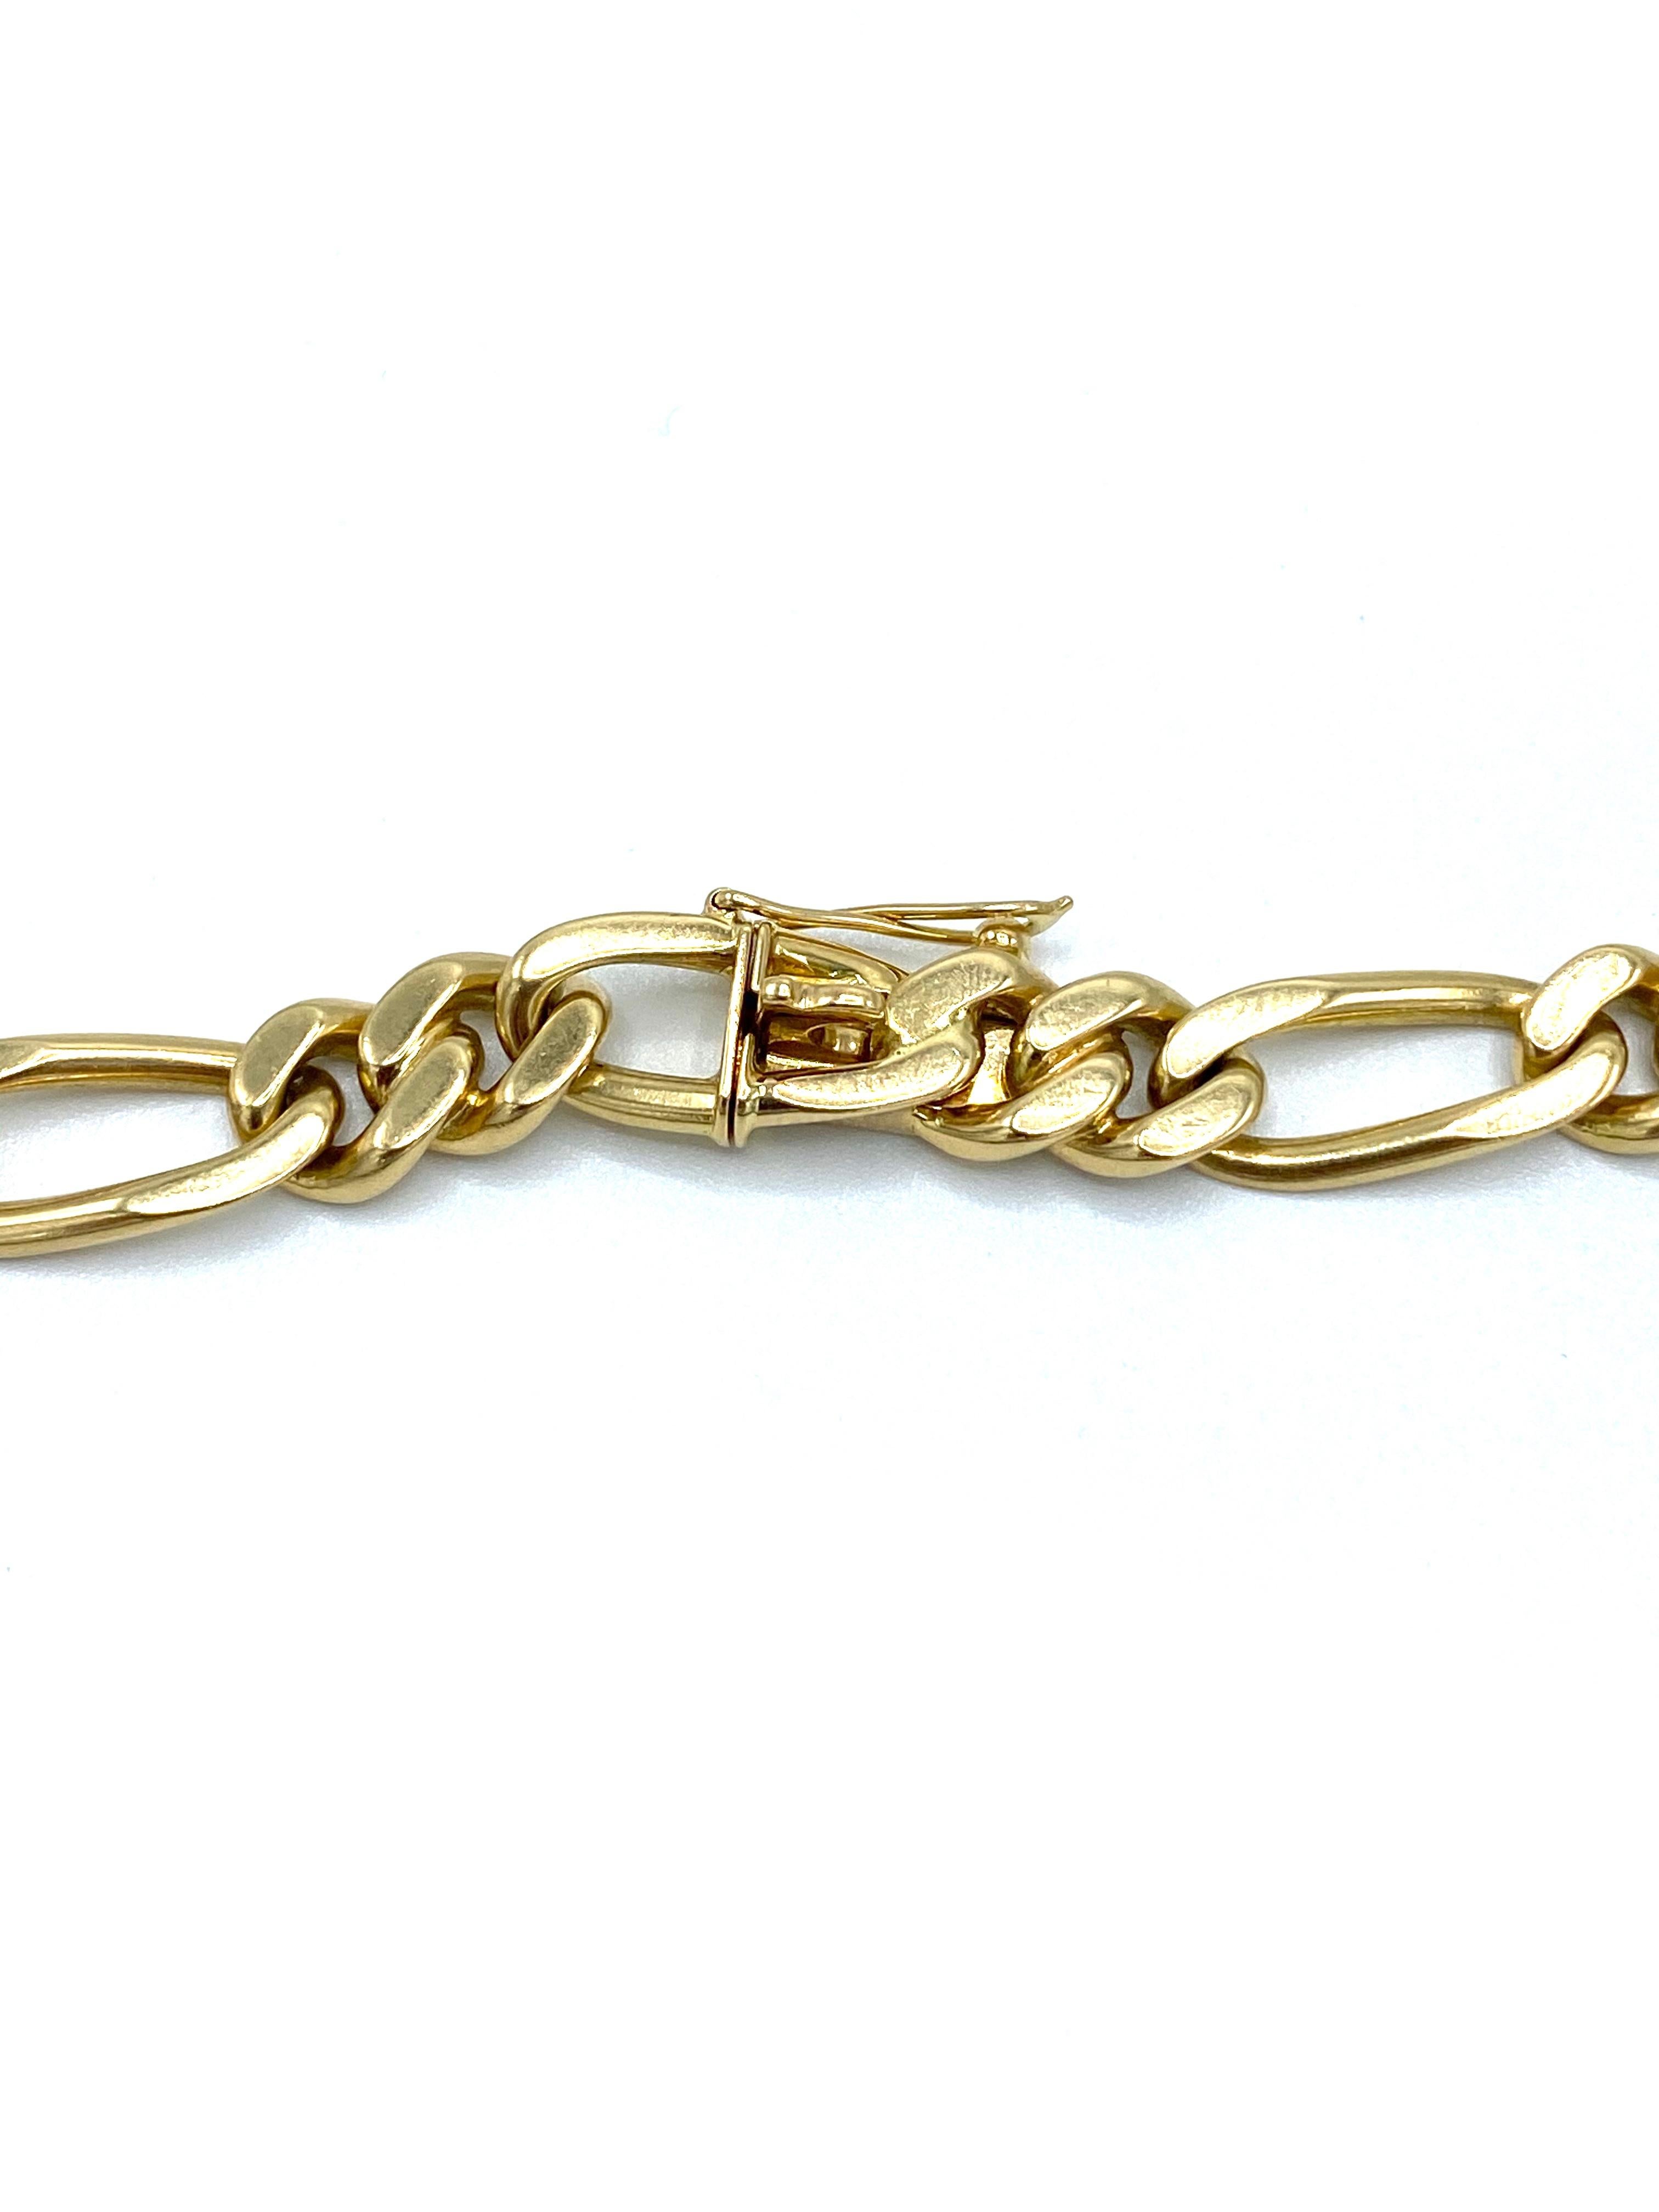 Vintage Van Cleef and Arpels Yellow Gold Link Chain Necklace 3